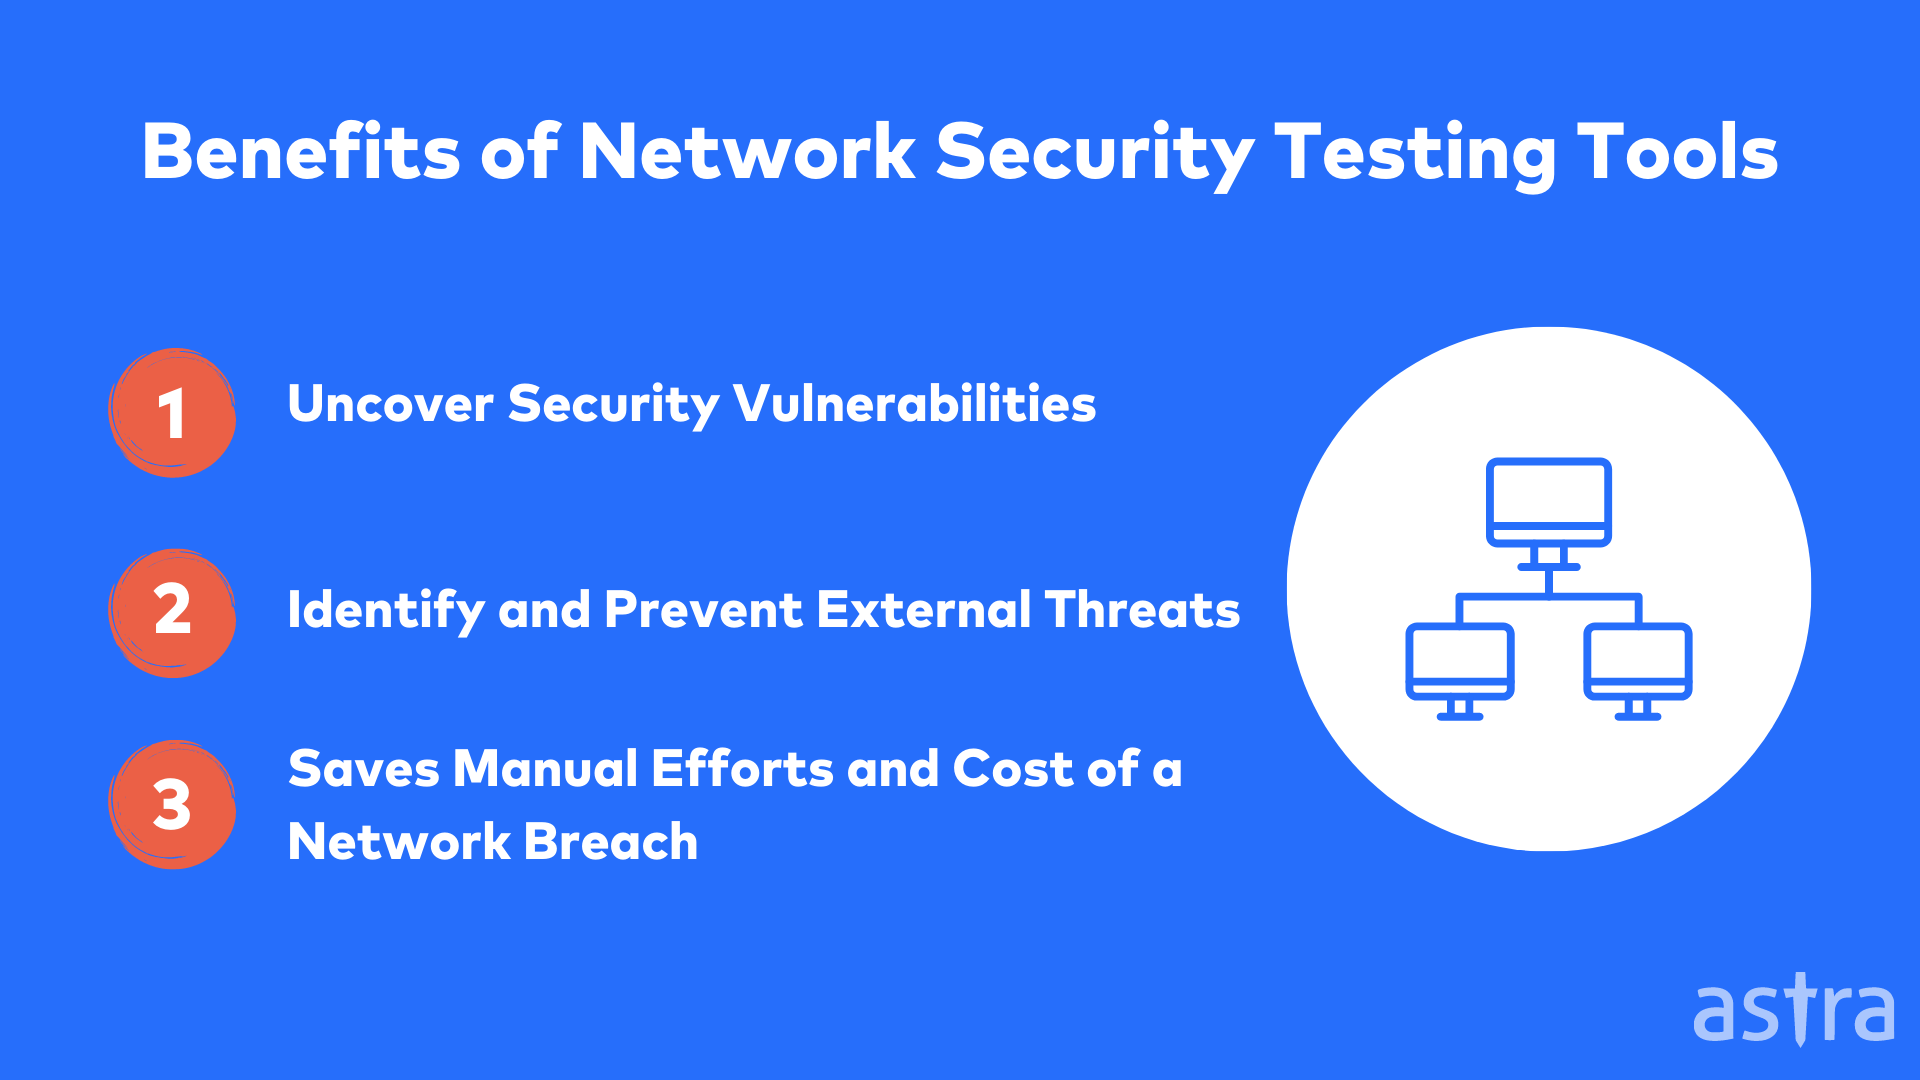 What are three 3 tools used to test a network for vulnerabilities?